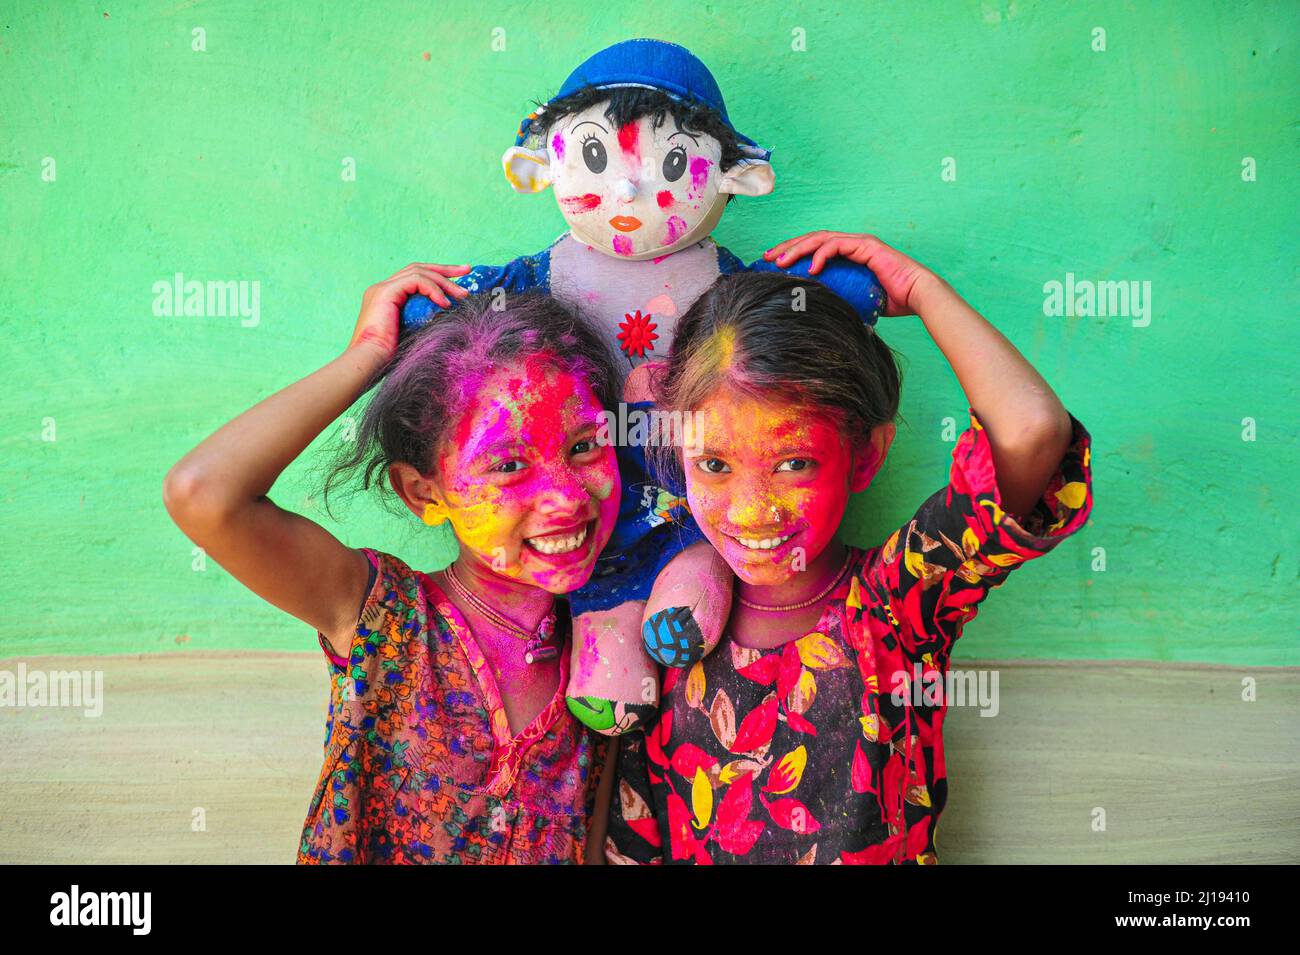 Bangladeshi children from Khan Tea garden posing for photos with their faces painted after adorning with colors like Rainbows on the celebration of th Stock Photo